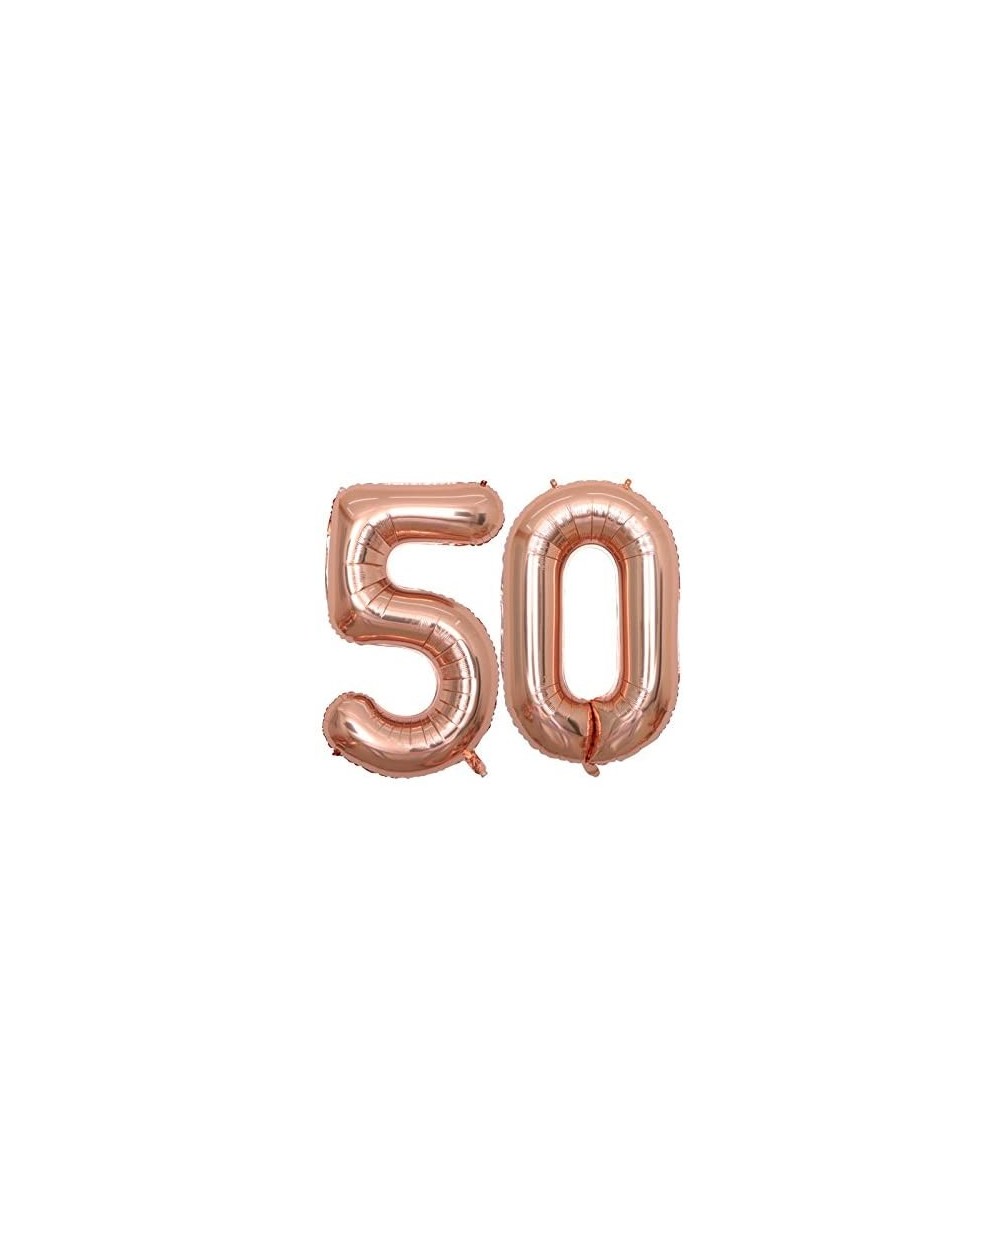 Balloons 40 inch Jumbo 50th Rose Gold Foil Balloons for Birthday Party Supplies-Anniversary Events Decorations and Graduation...